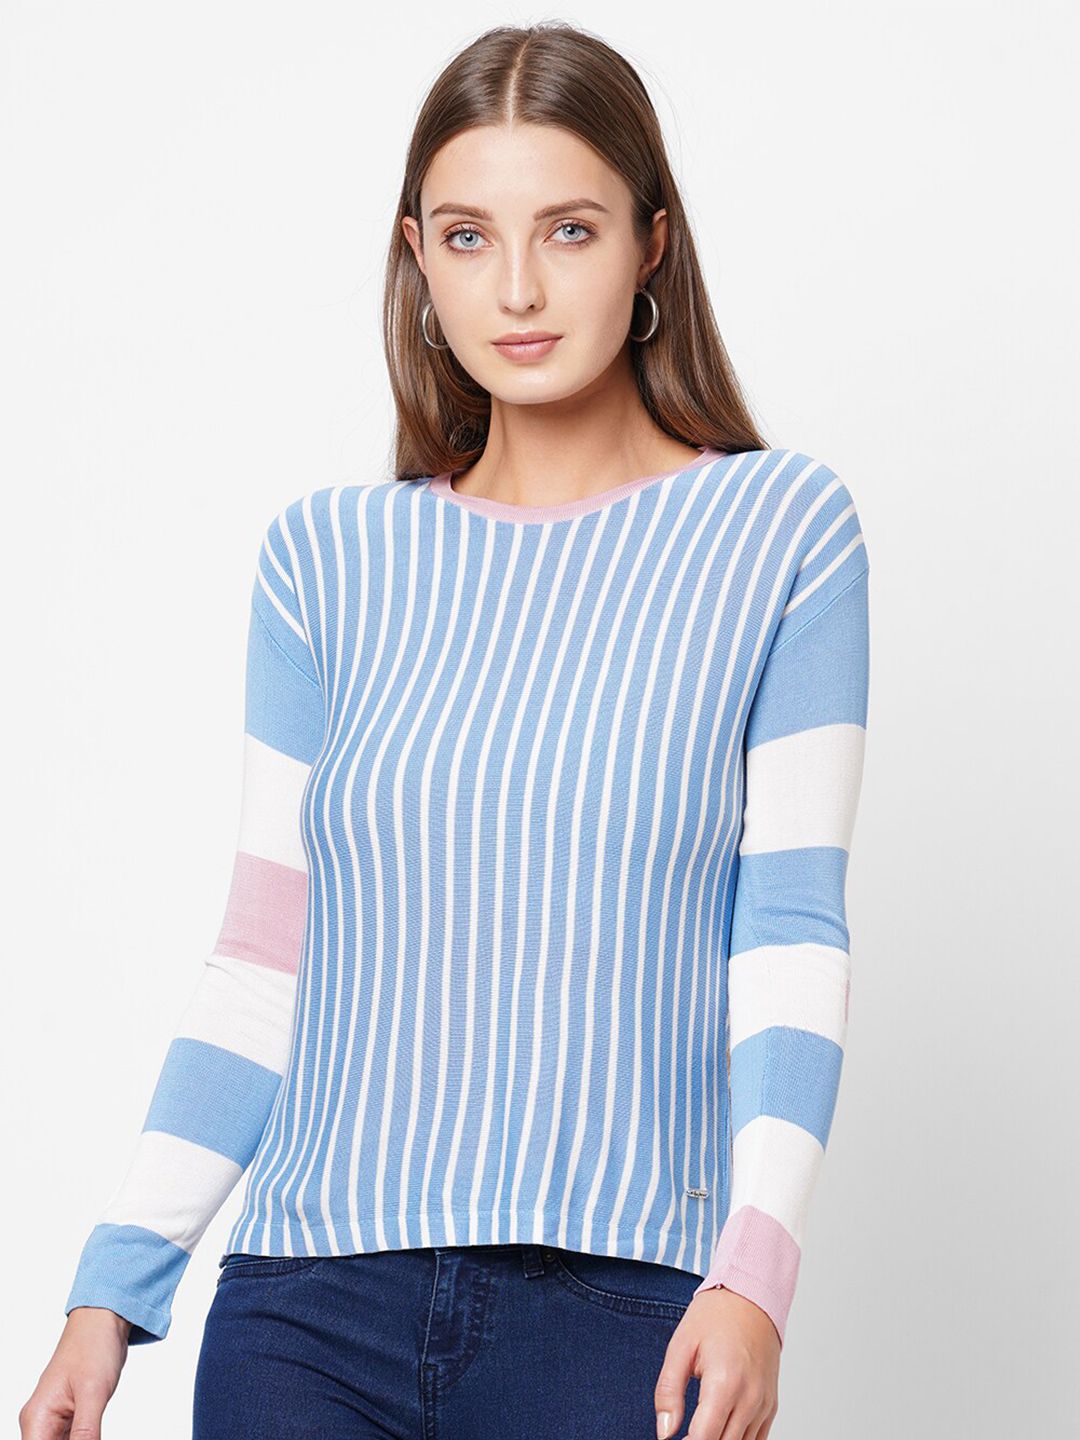 Pepe Jeans Women Blue & White Striped Pullover Price in India